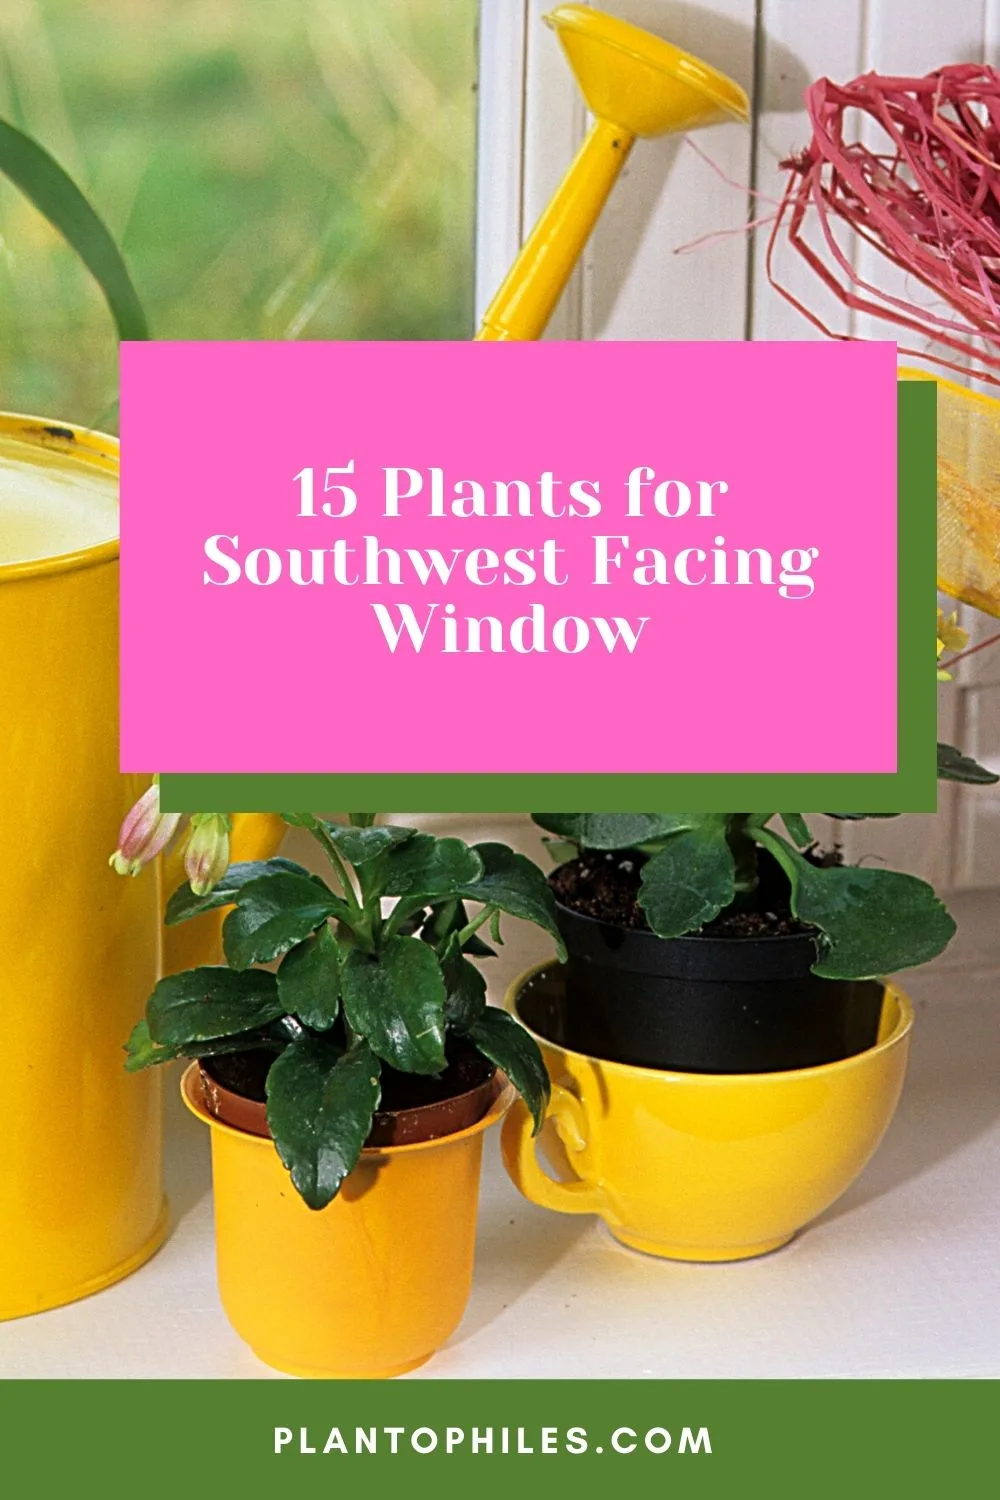 15 Plants for Southwest Facing Window